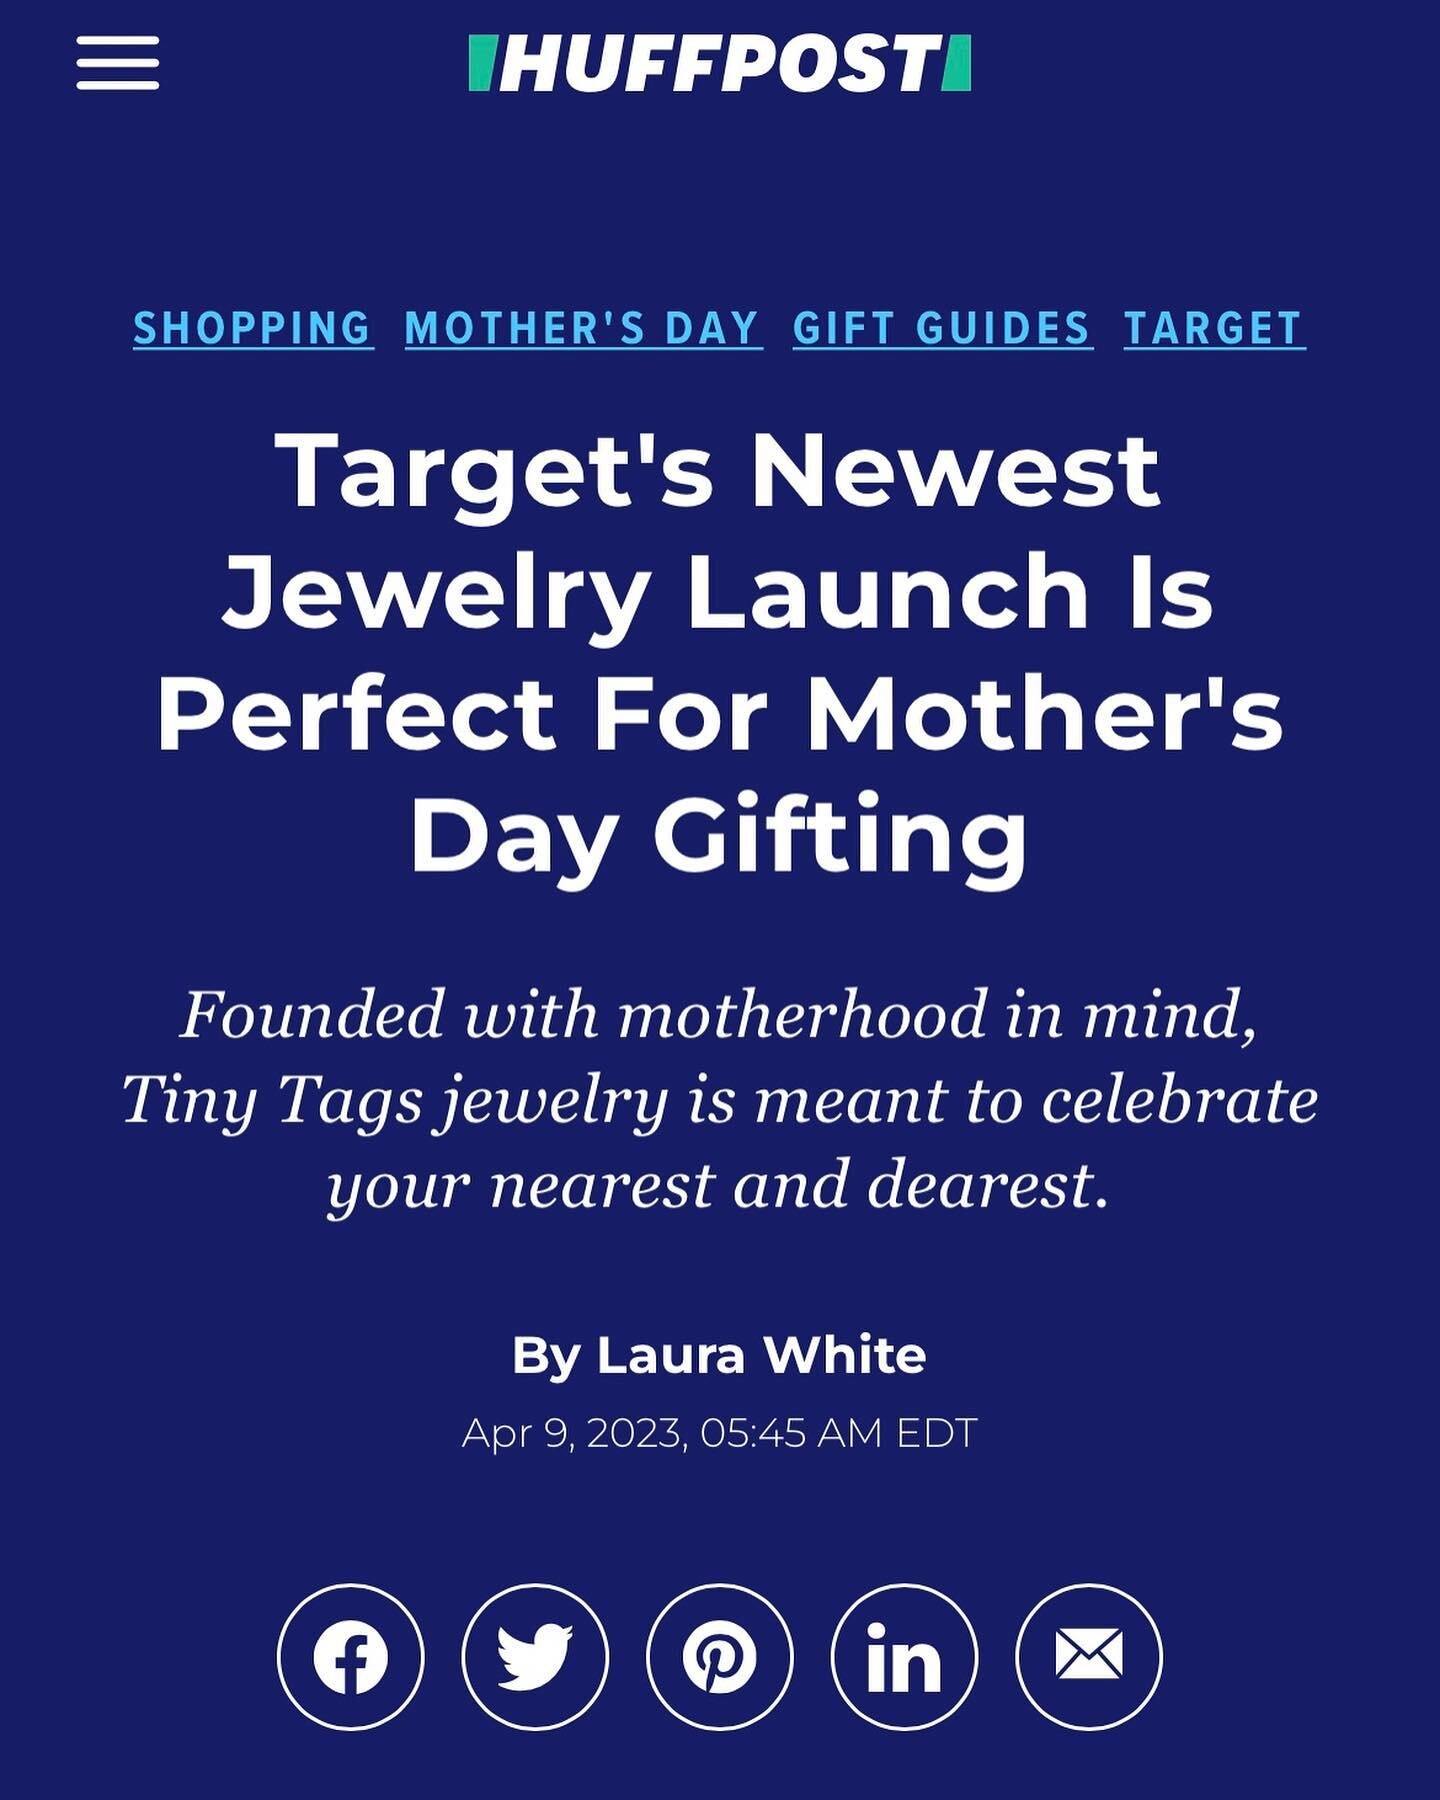 Tiny Tags&rsquo; capsule collection just launched @target 💎🎯 Its a can&rsquo;t miss - especially with Mother&rsquo;s Day right around the corner. Check out all the details on @huffpost via the link in our stories. Happy shopping! ✨